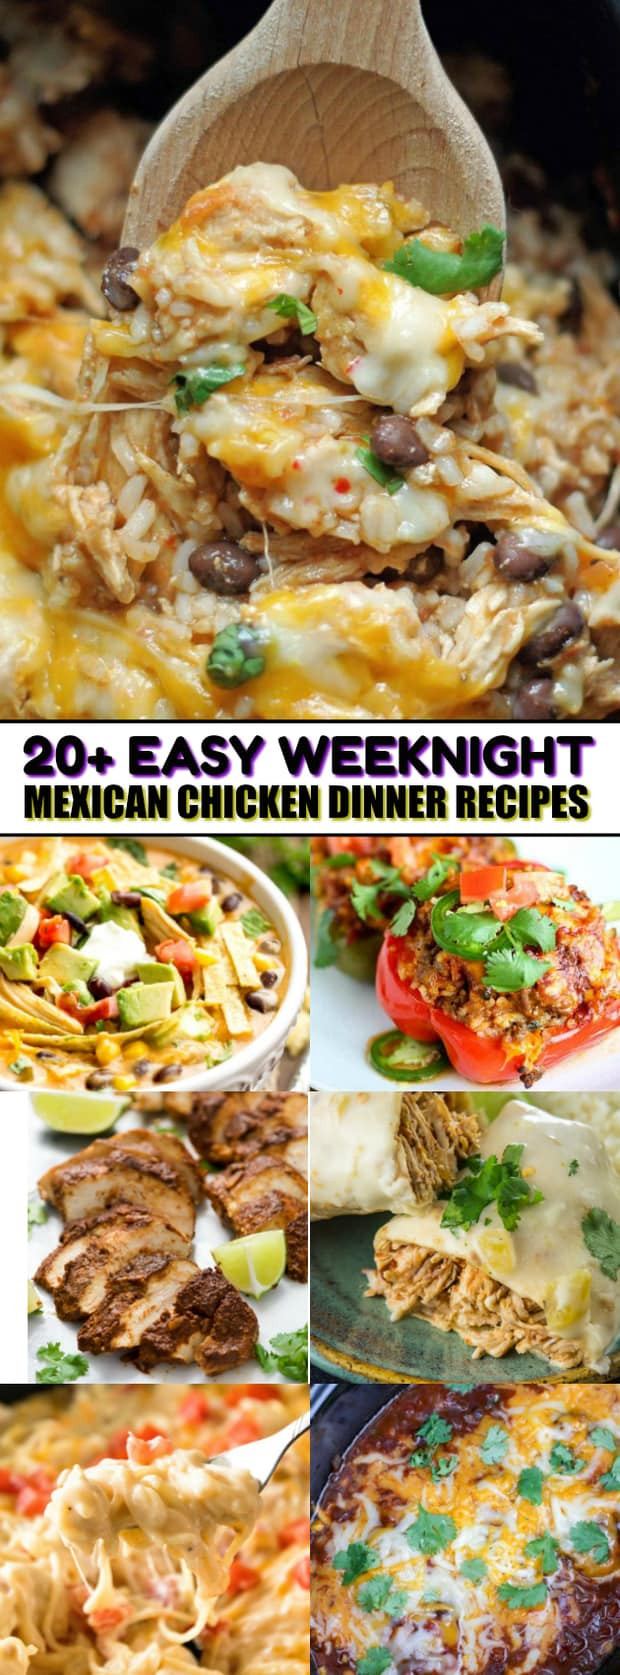 Easy Mexican Dinner Recipes
 Easy Weeknight Mexican Chicken Dinner Recipes